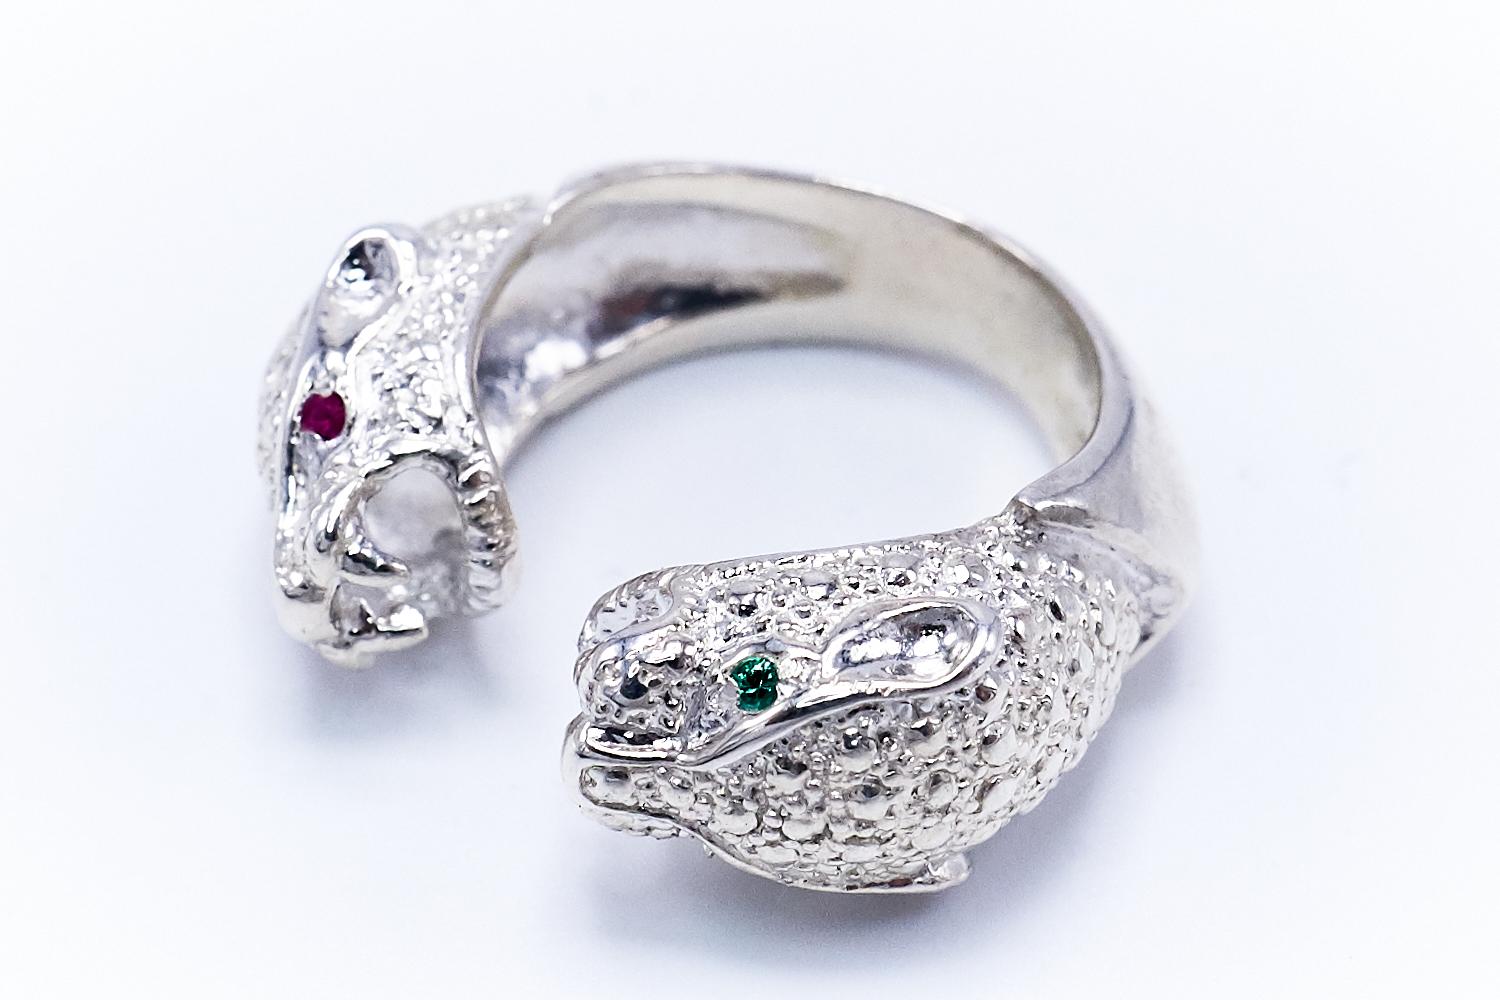 Emerald Cut Emerald Ruby  Double Head Jaguar Ring Sterling Silver Animal Jewelry J Dauphin For Sale